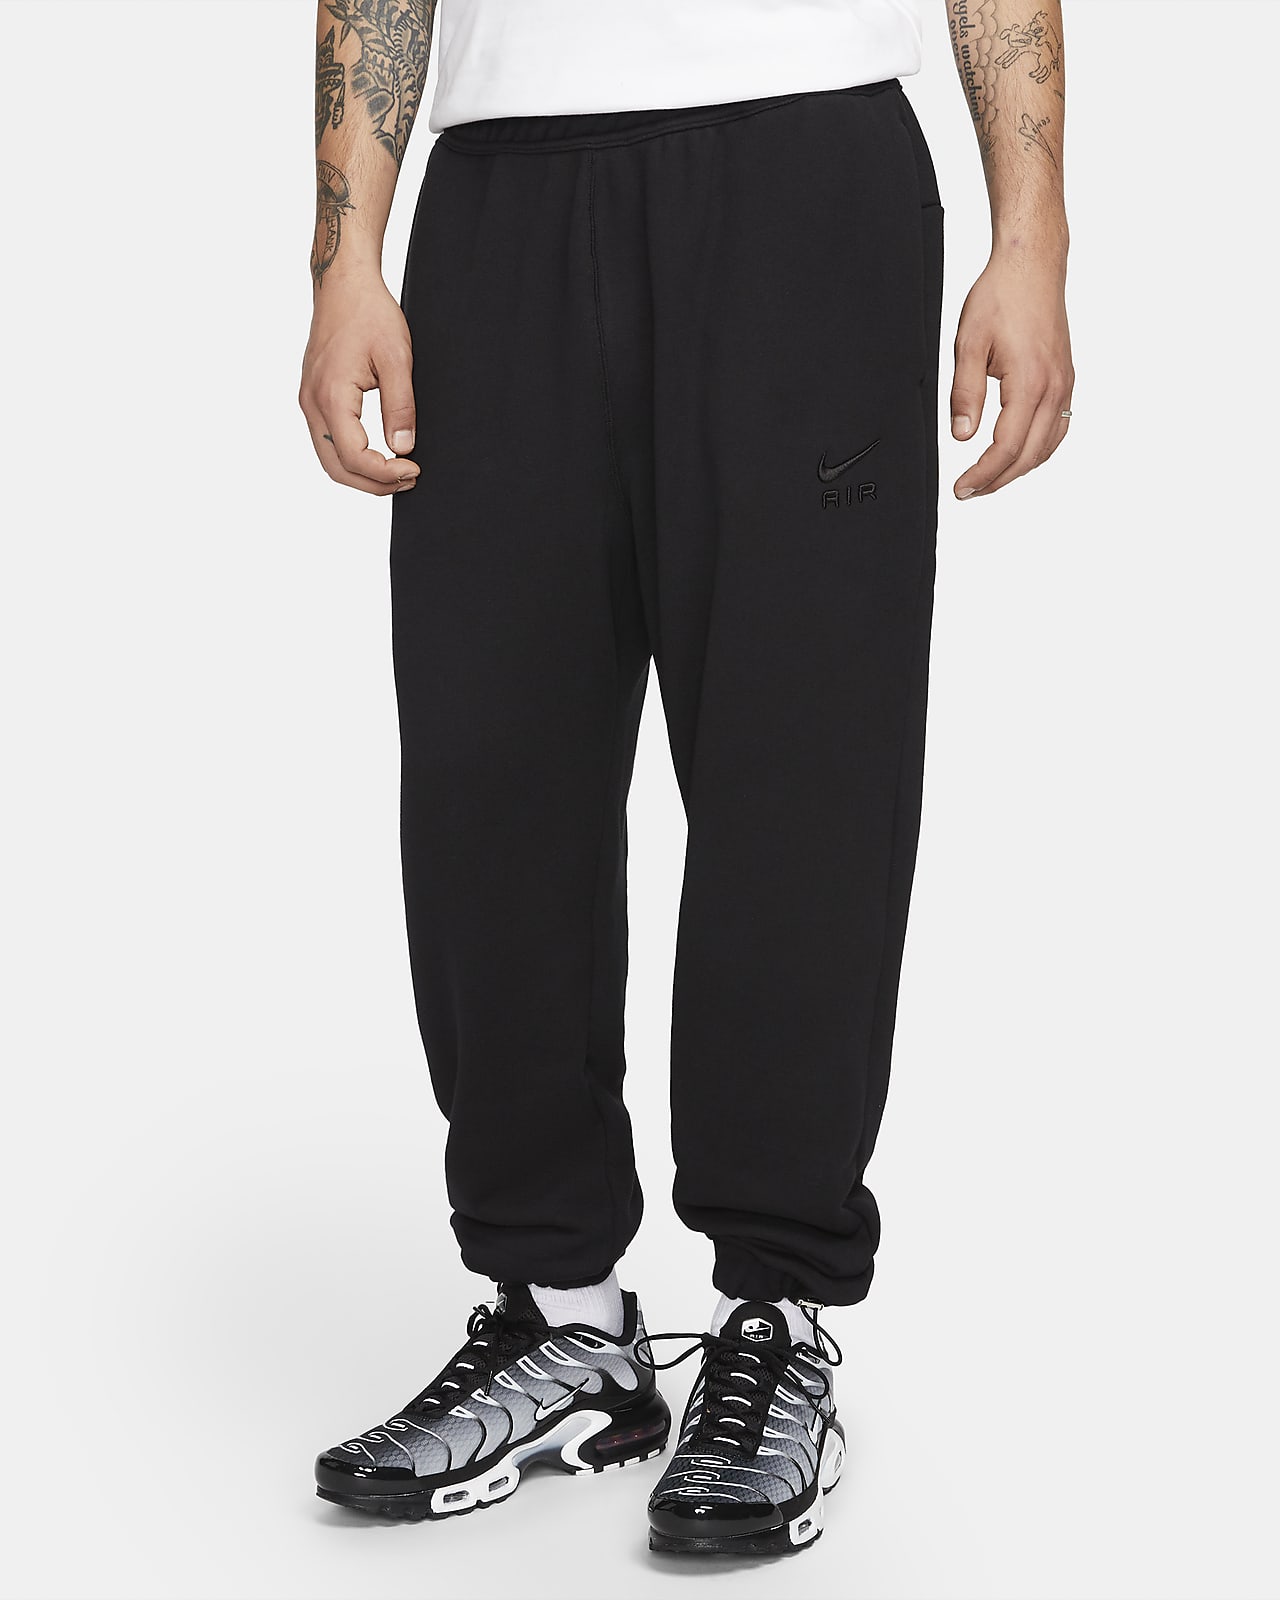 gat familie begroting Nike Air Men's French Terry Joggers. Nike.com